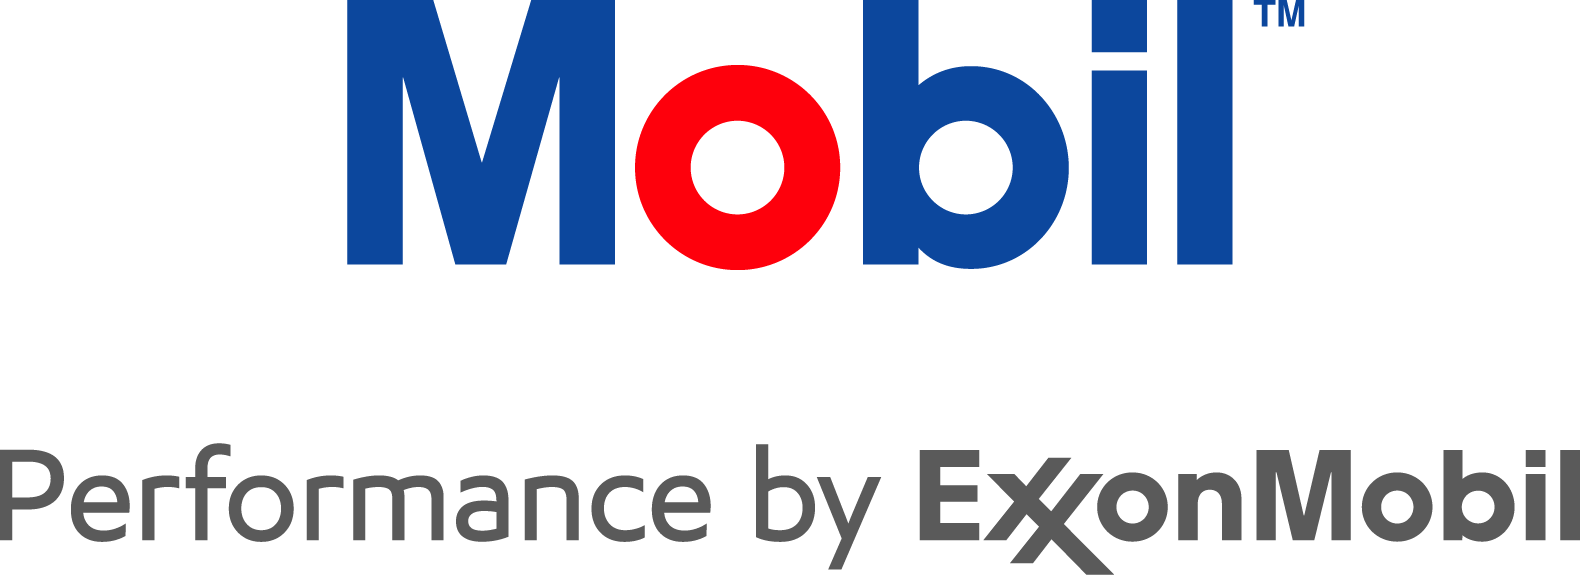 Download Mission Statement Mobil Performance By Exxonmobil Png Image With No Background Pngkey Com